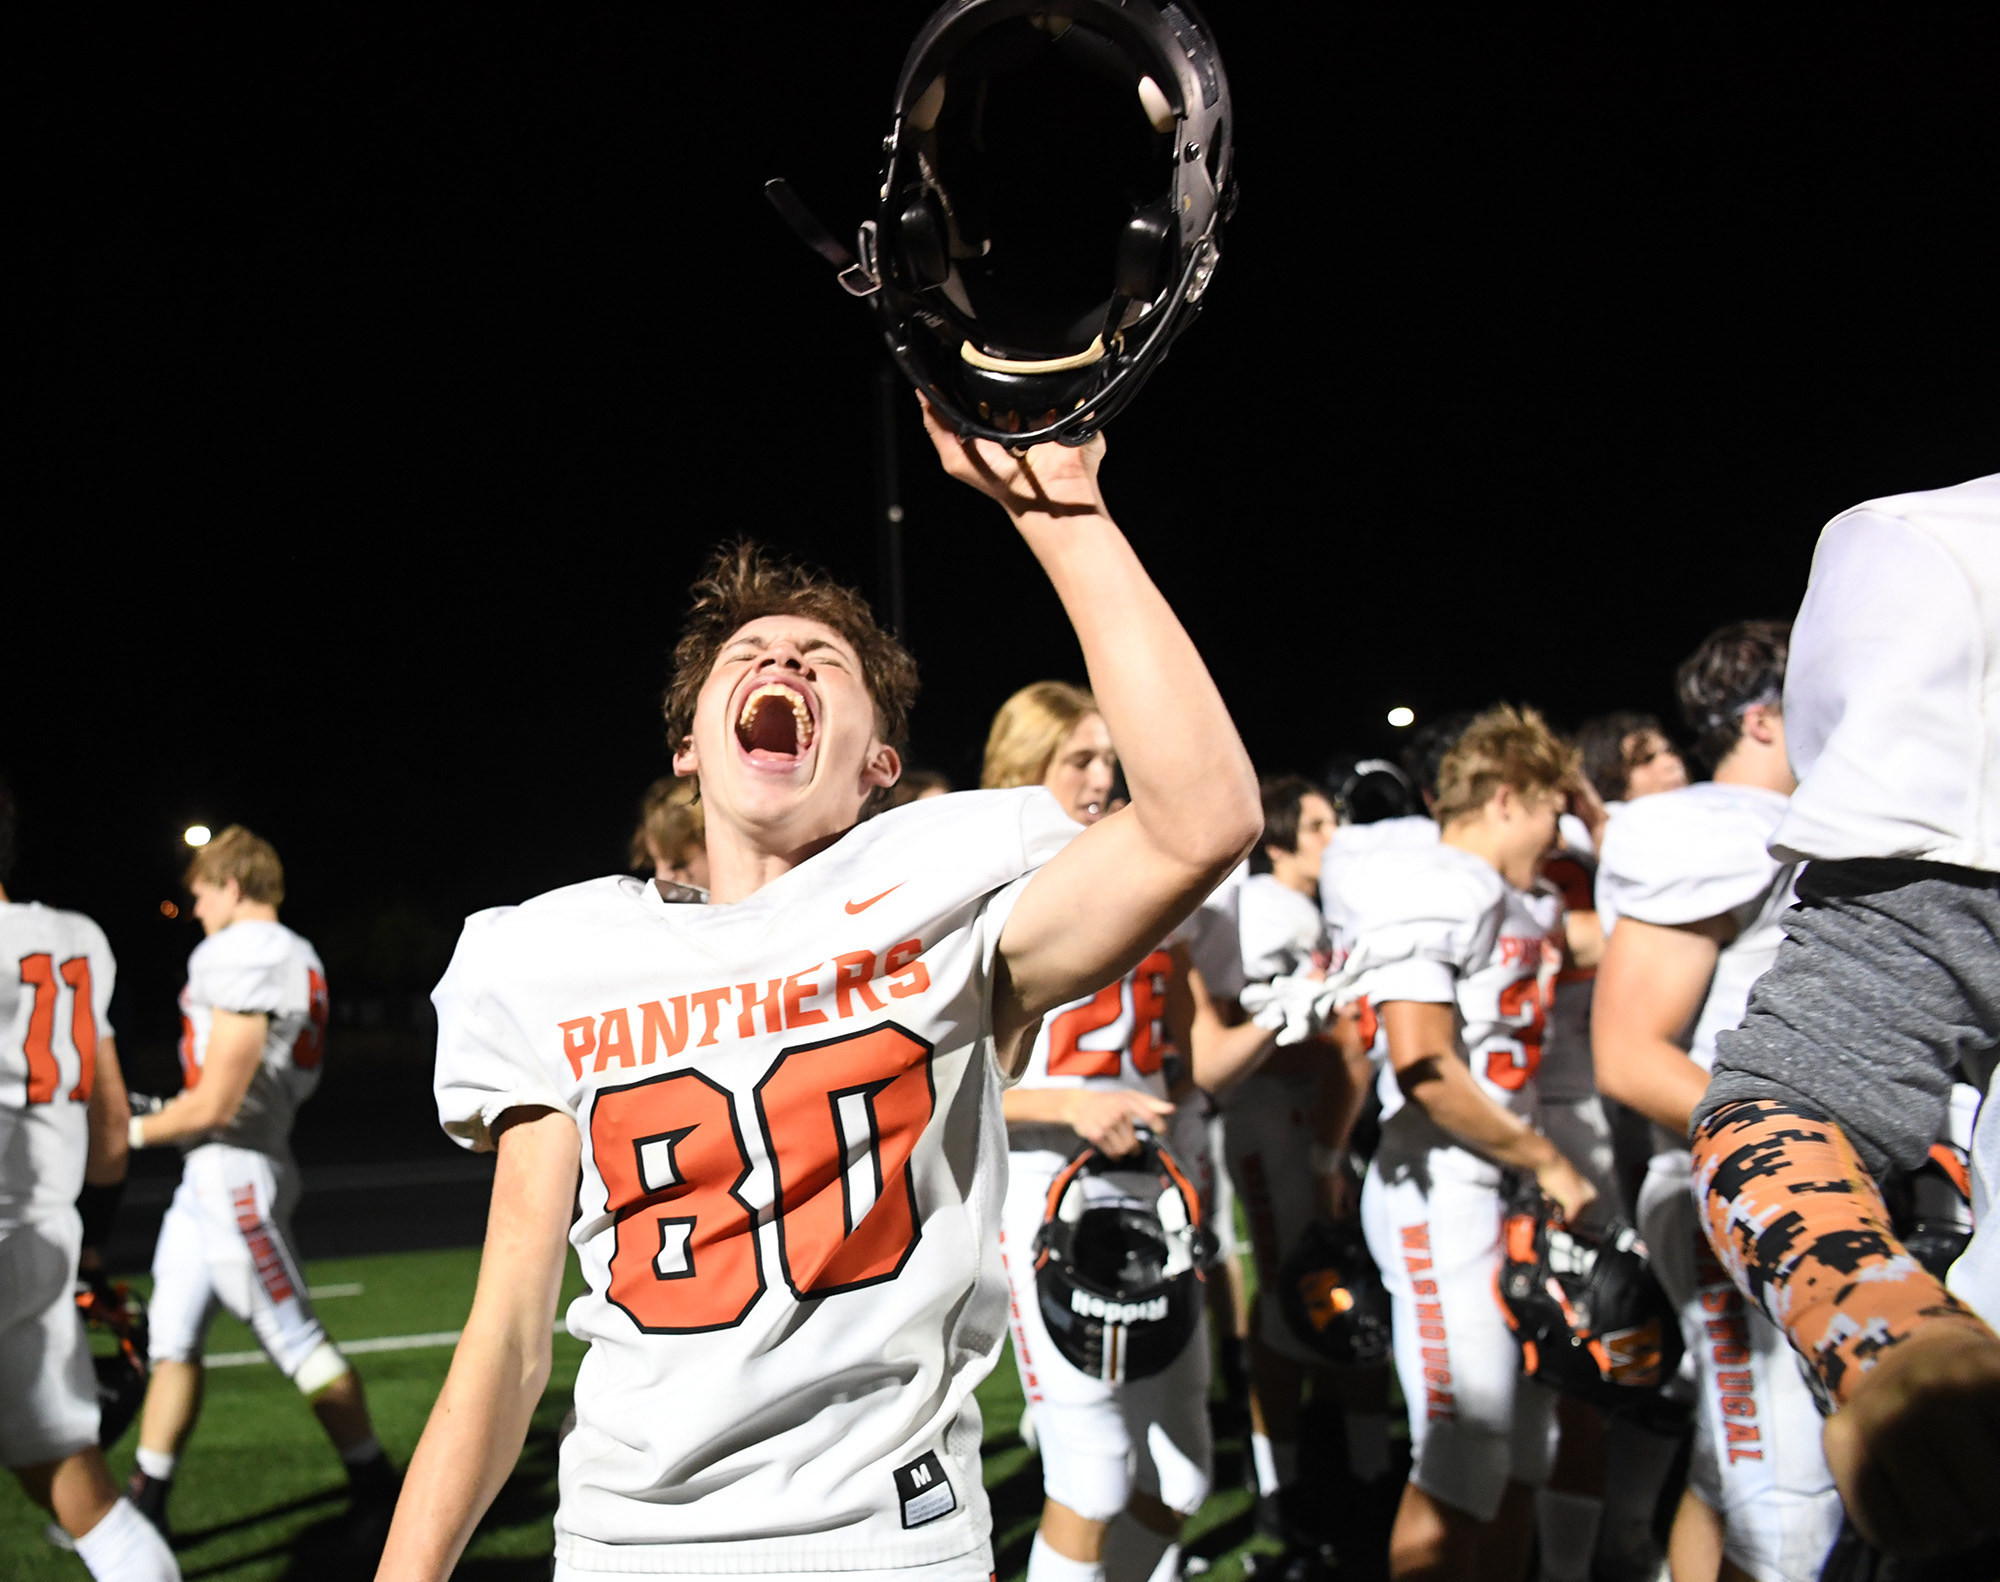 Washougal senior Josiah Aiton lets out a triumphant yell Friday, Sept. 30, 2022, after the Panthers’ 34-27 win against Ridgefield at Ridgefield High School.